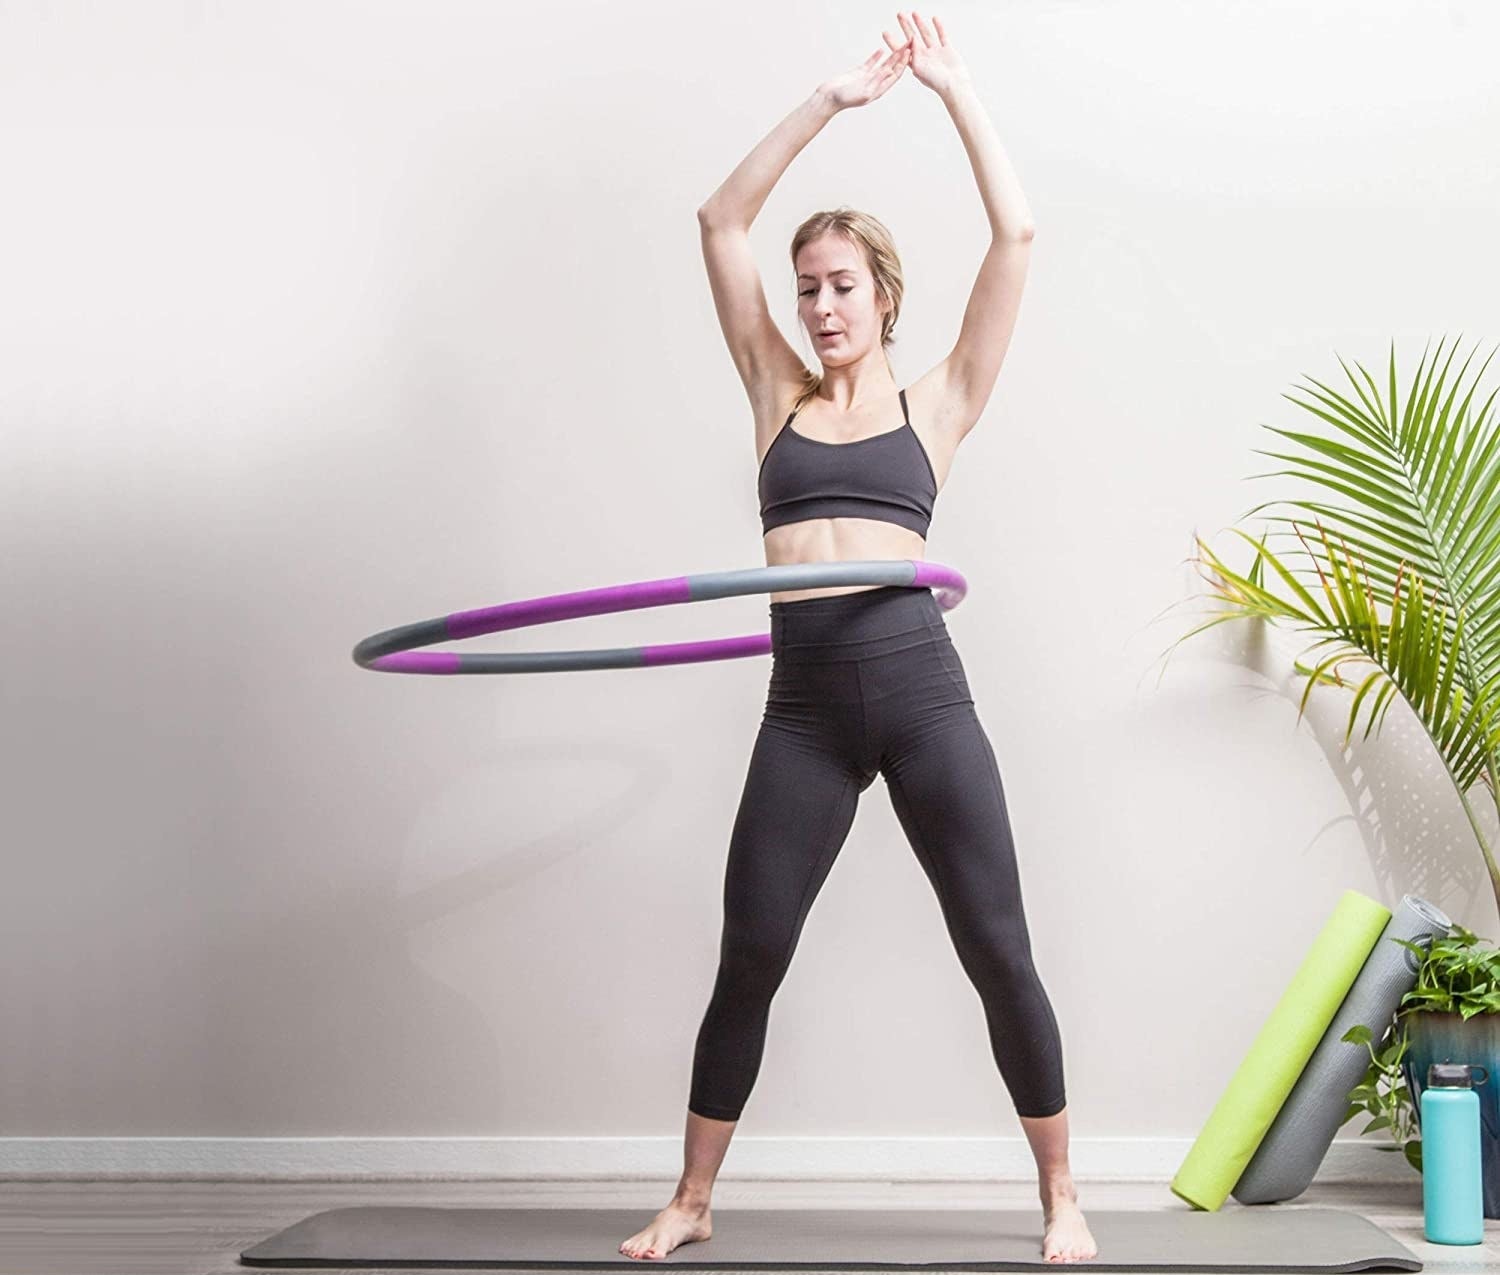 A model using the hoola hoop in a home gym